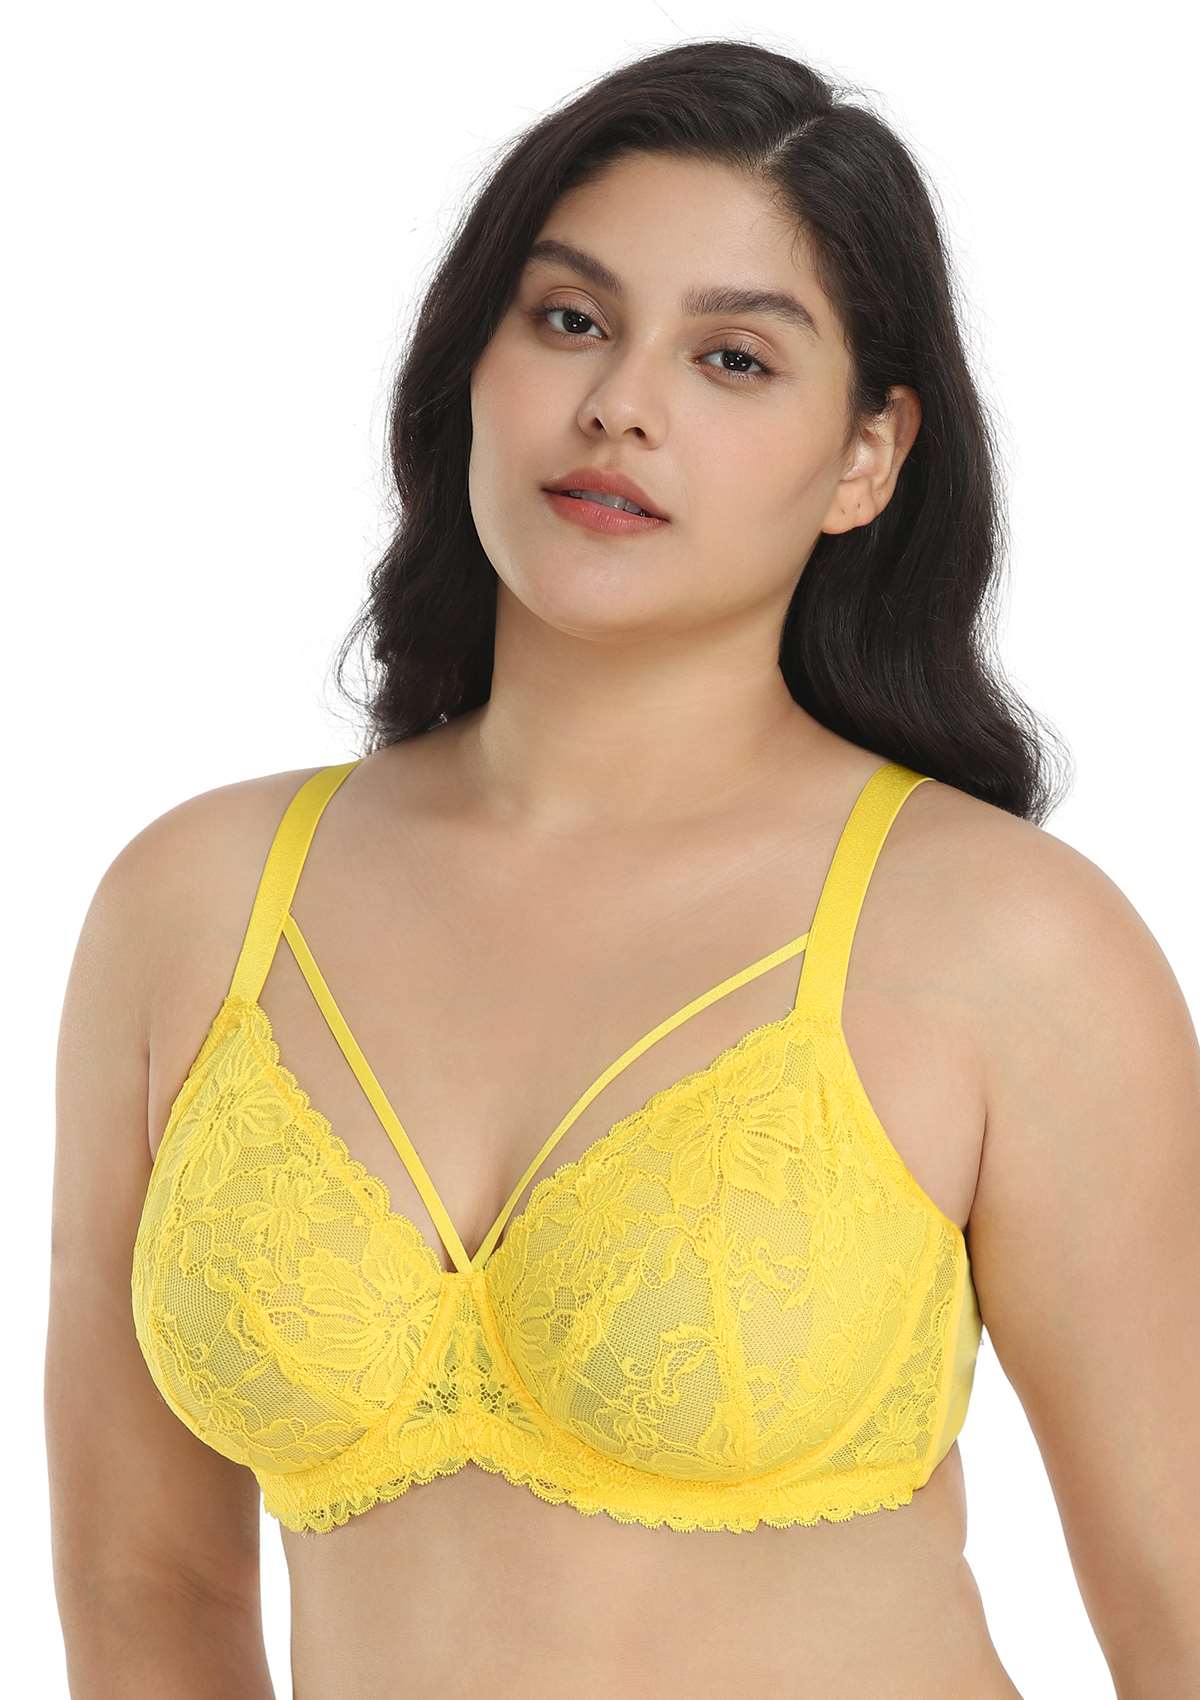 HSIA Unlined Lace Mesh Minimizer Bra For Large Breasts, Full Coverage - Bright Yellow / 40 / C